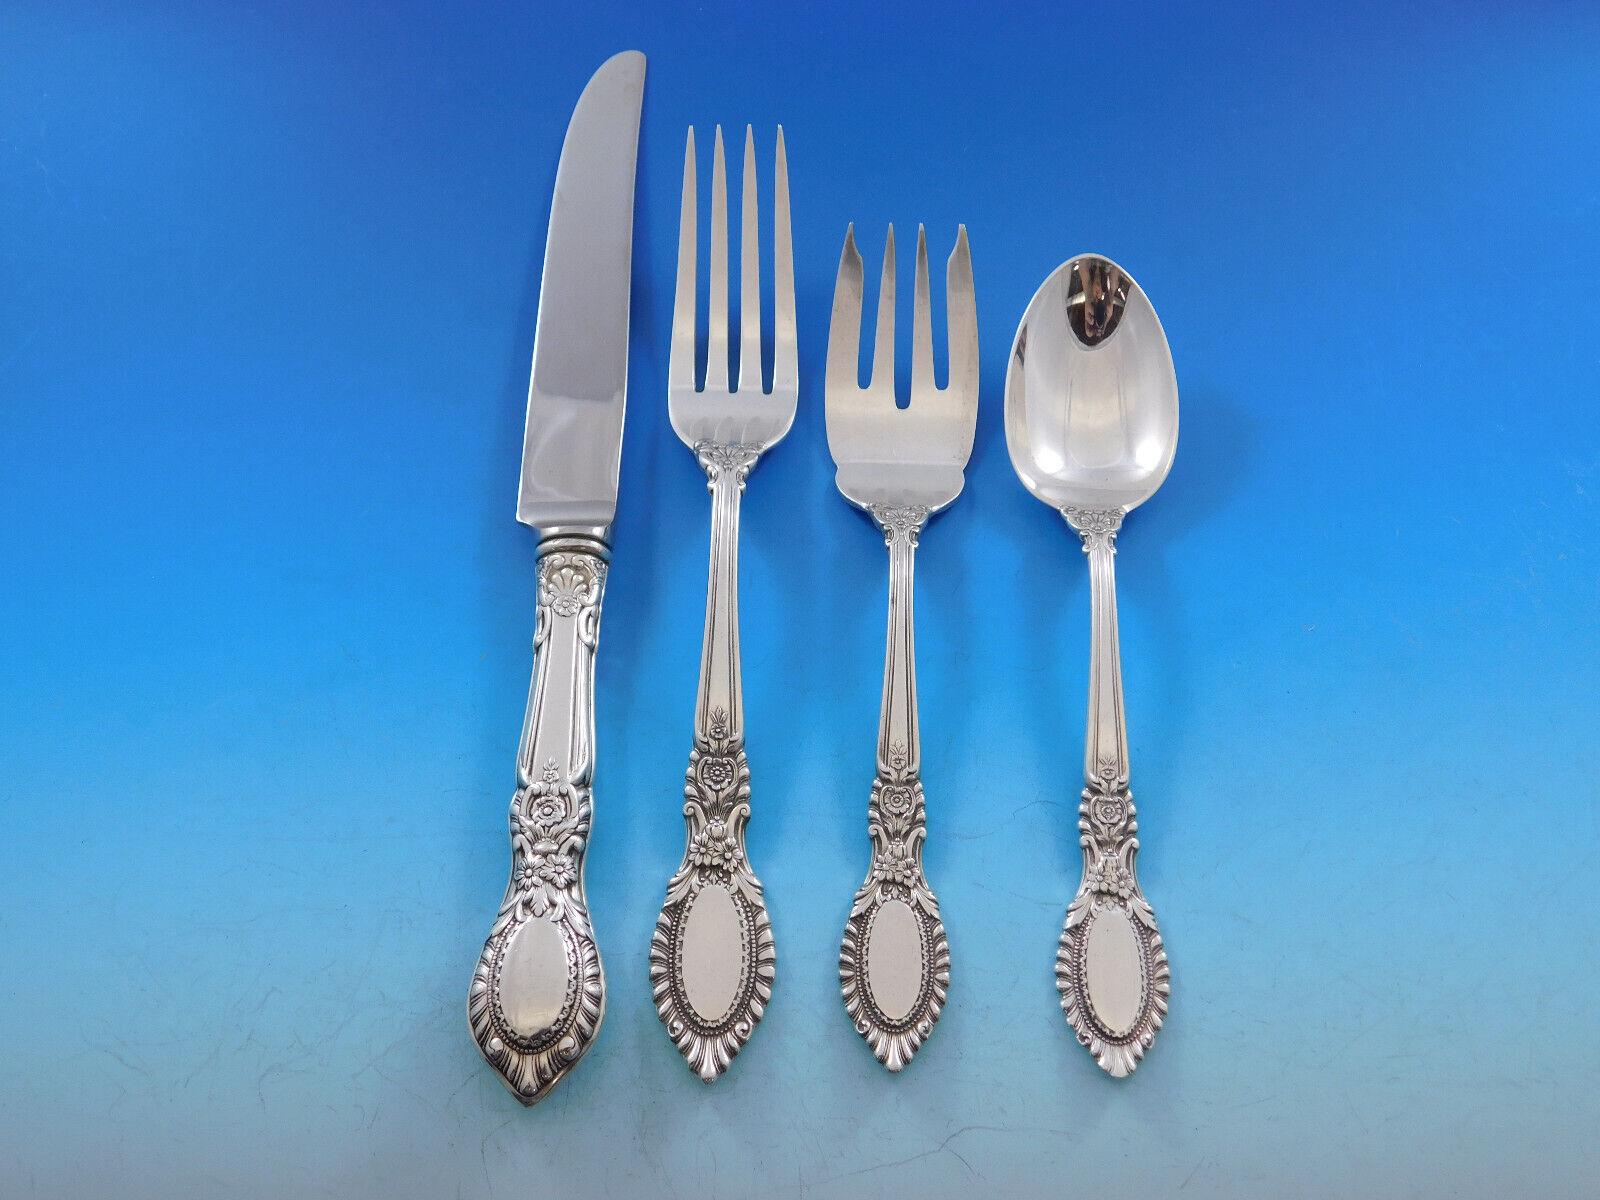 Heirloom quality Guildhall by Reed and Barton sterling silver Flatware set, 49 pieces. This set includes:

8 Knives, 8 3/4